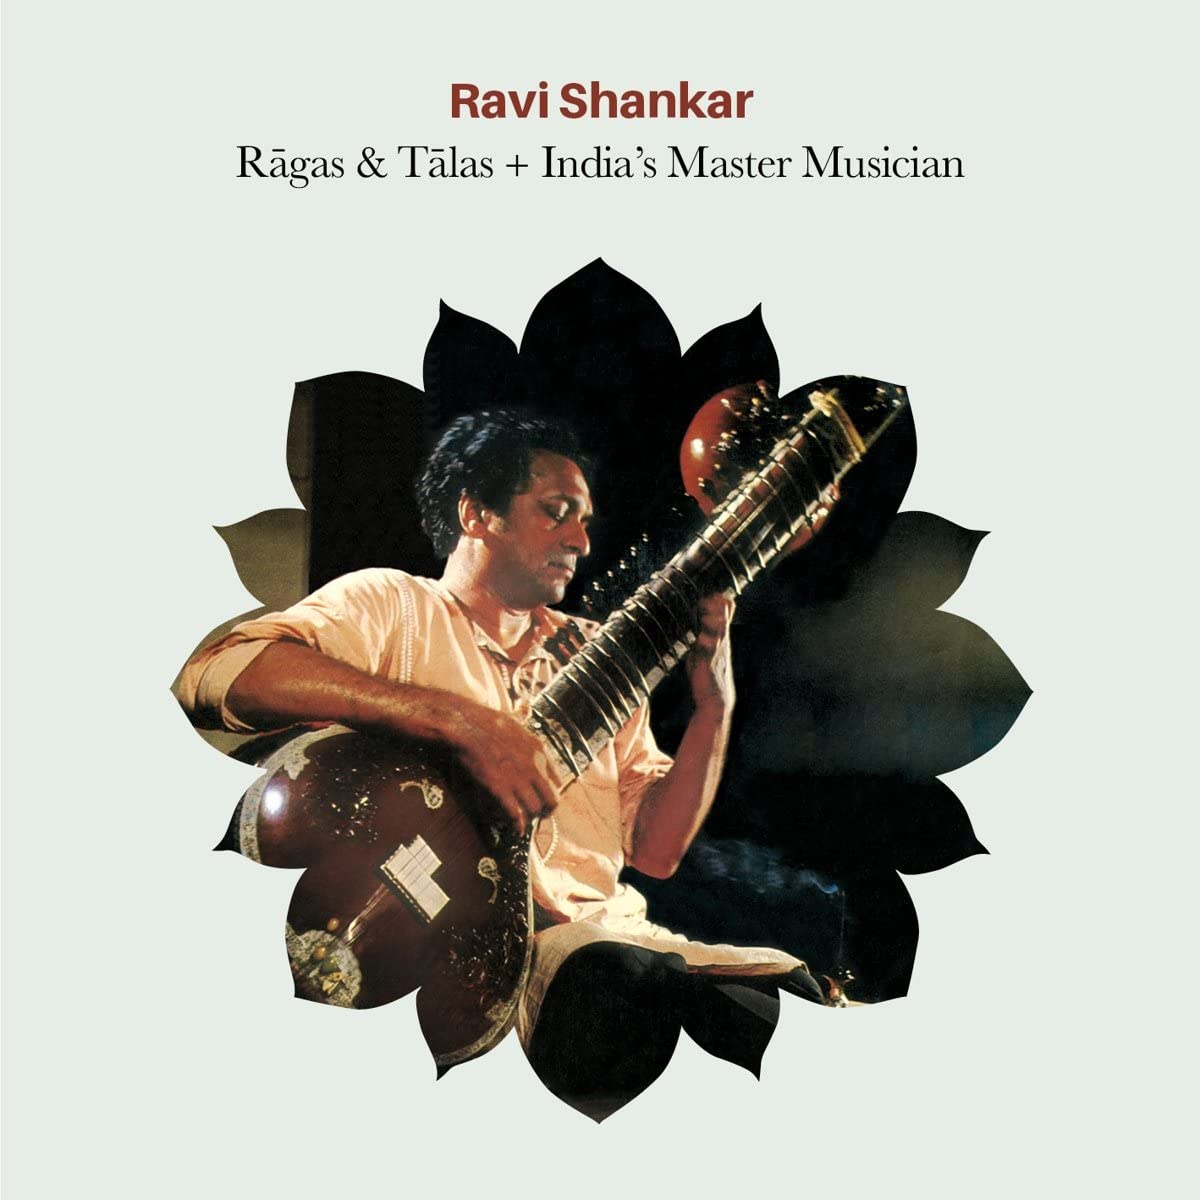 Review of Ragas & Talas/India's Master Musician